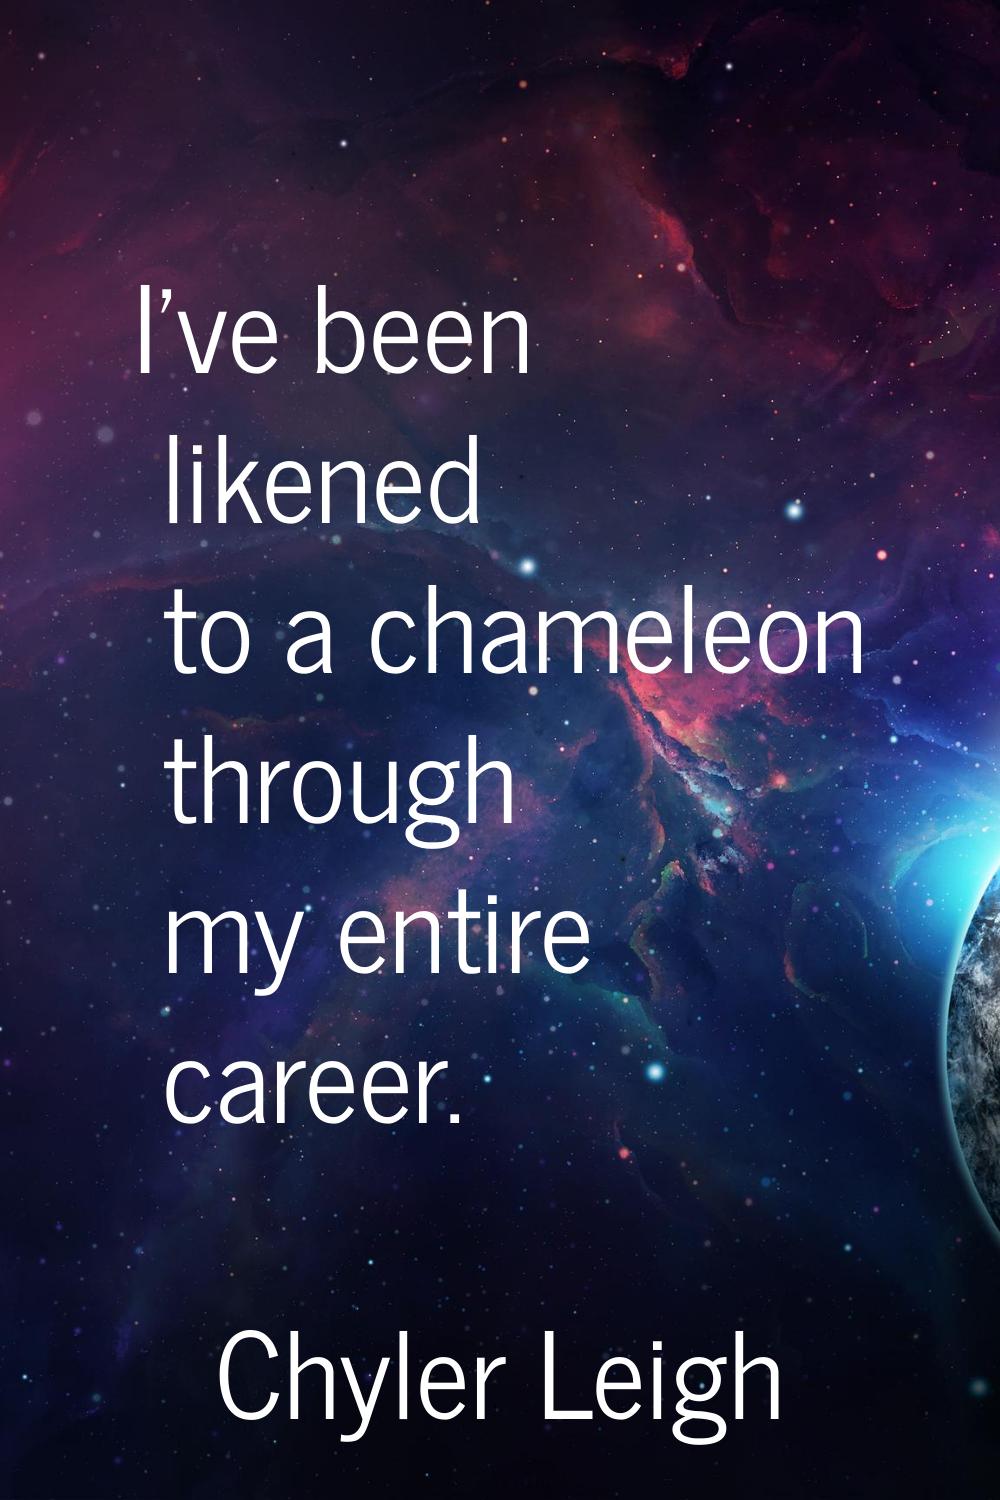 I've been likened to a chameleon through my entire career.